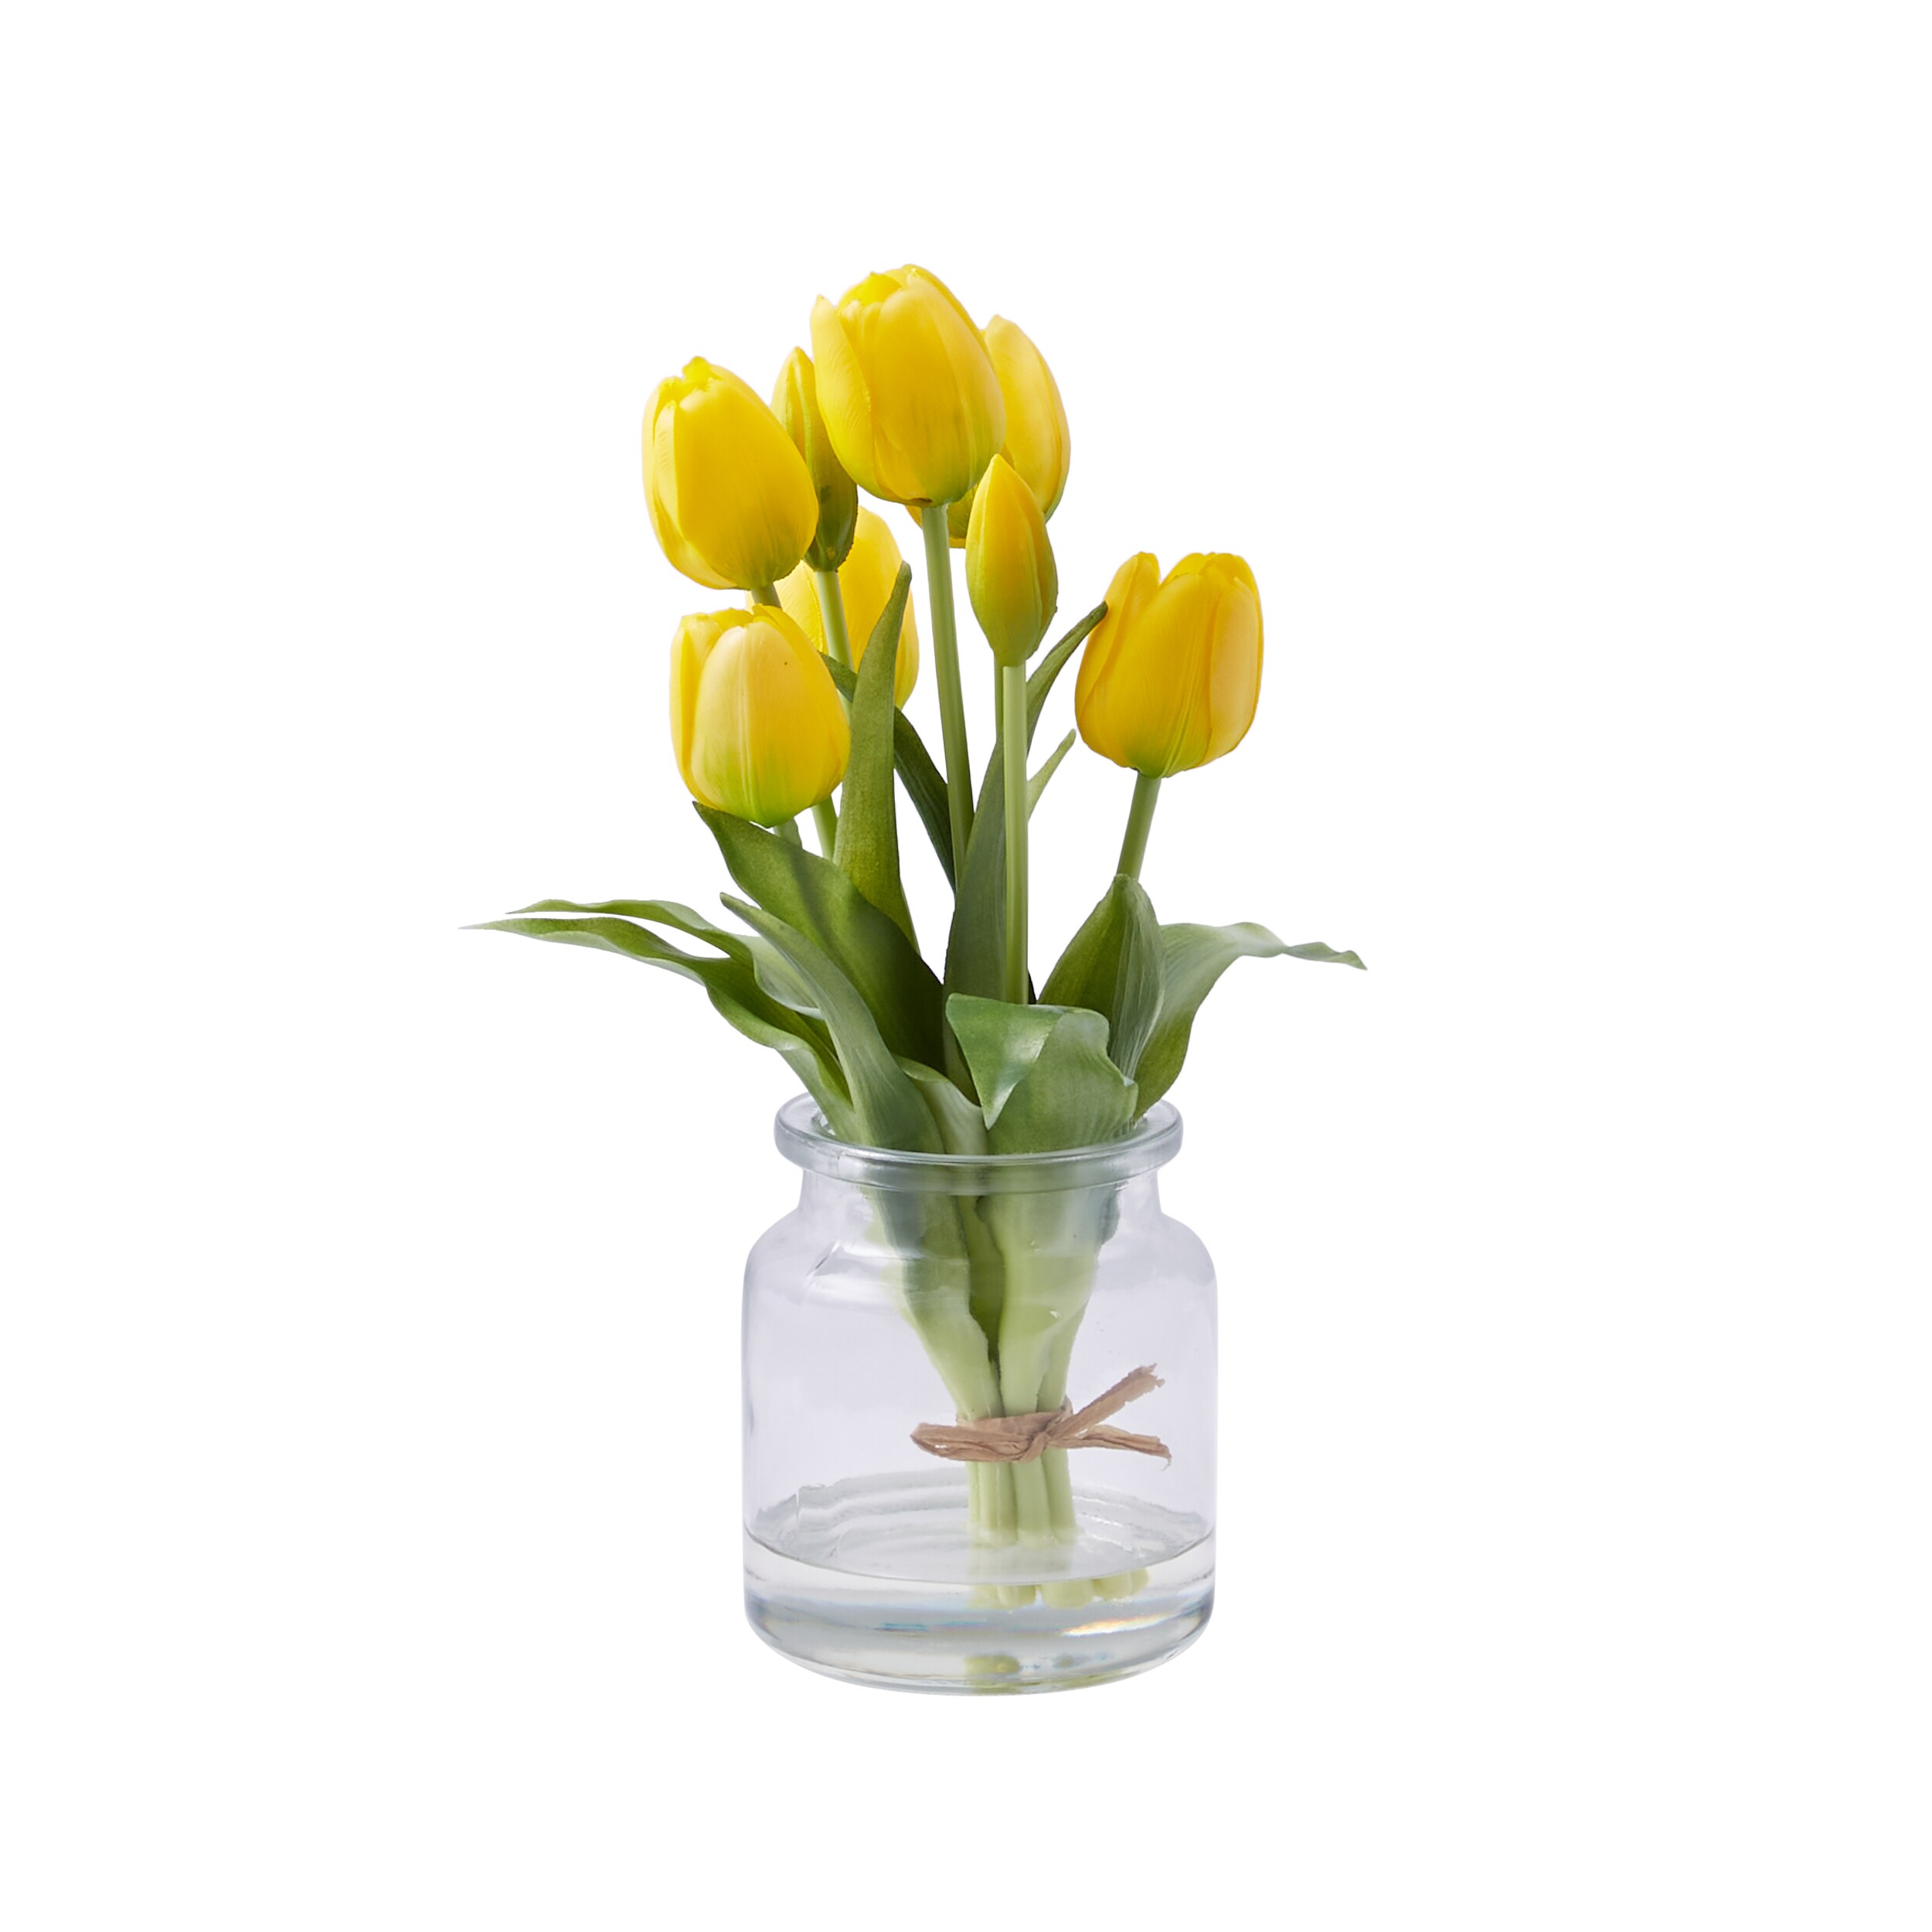 Whirlpool Heavy Glass Art Vase in Green or Yellow 